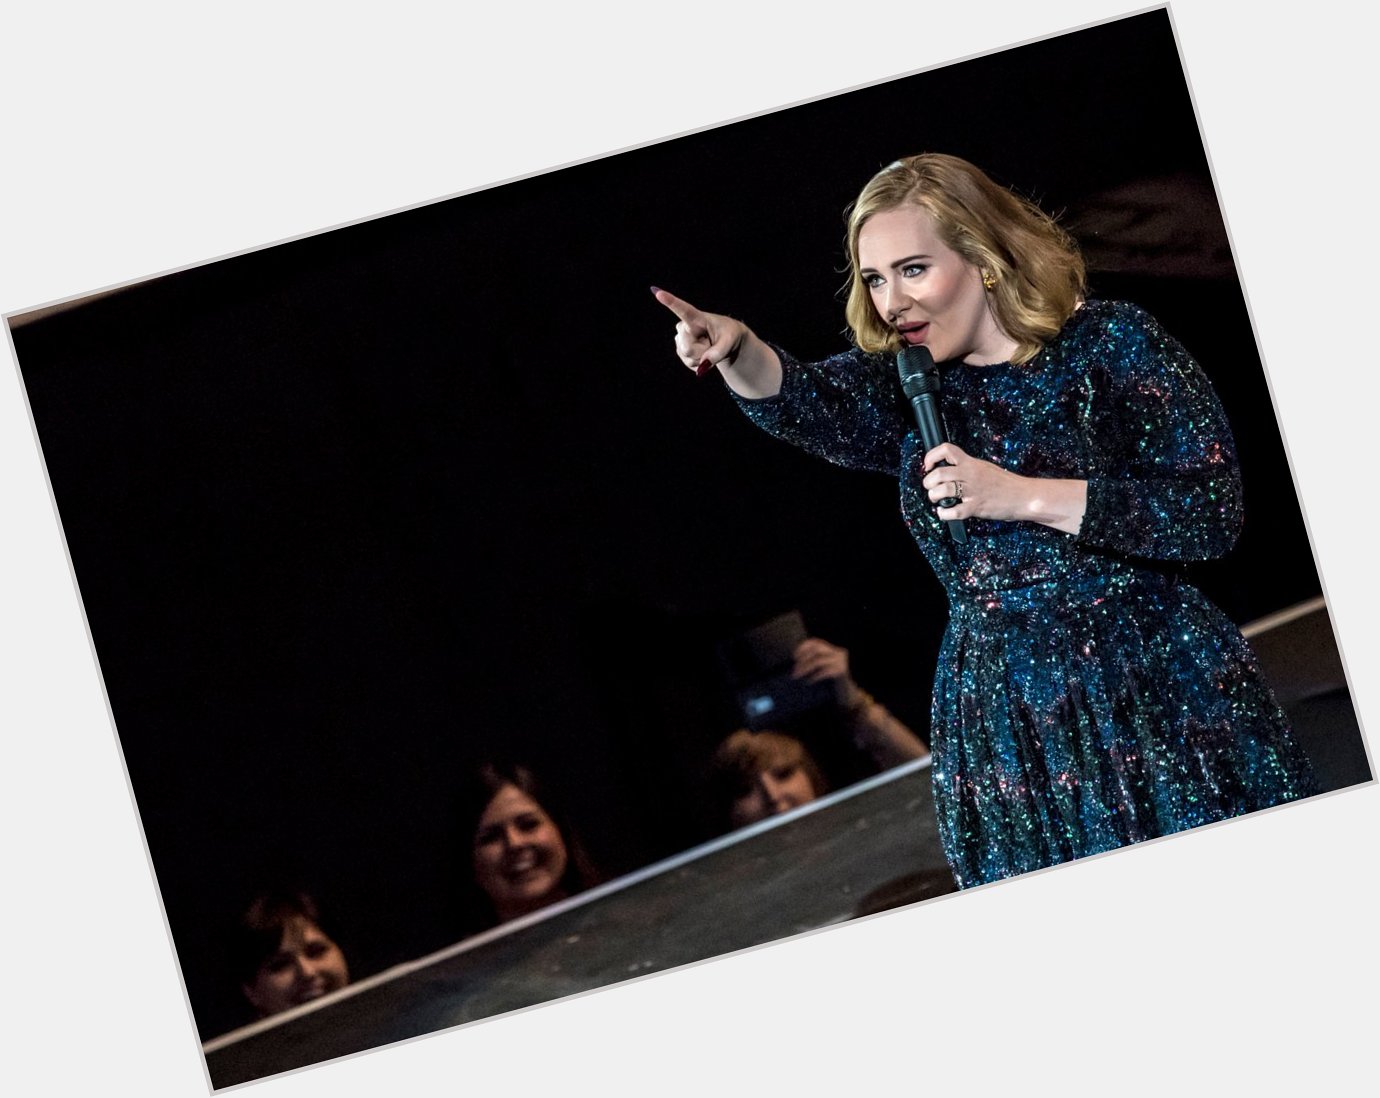 Happy birthday Adele! From pranks to photobombs, here are 10 of her funniest moments  